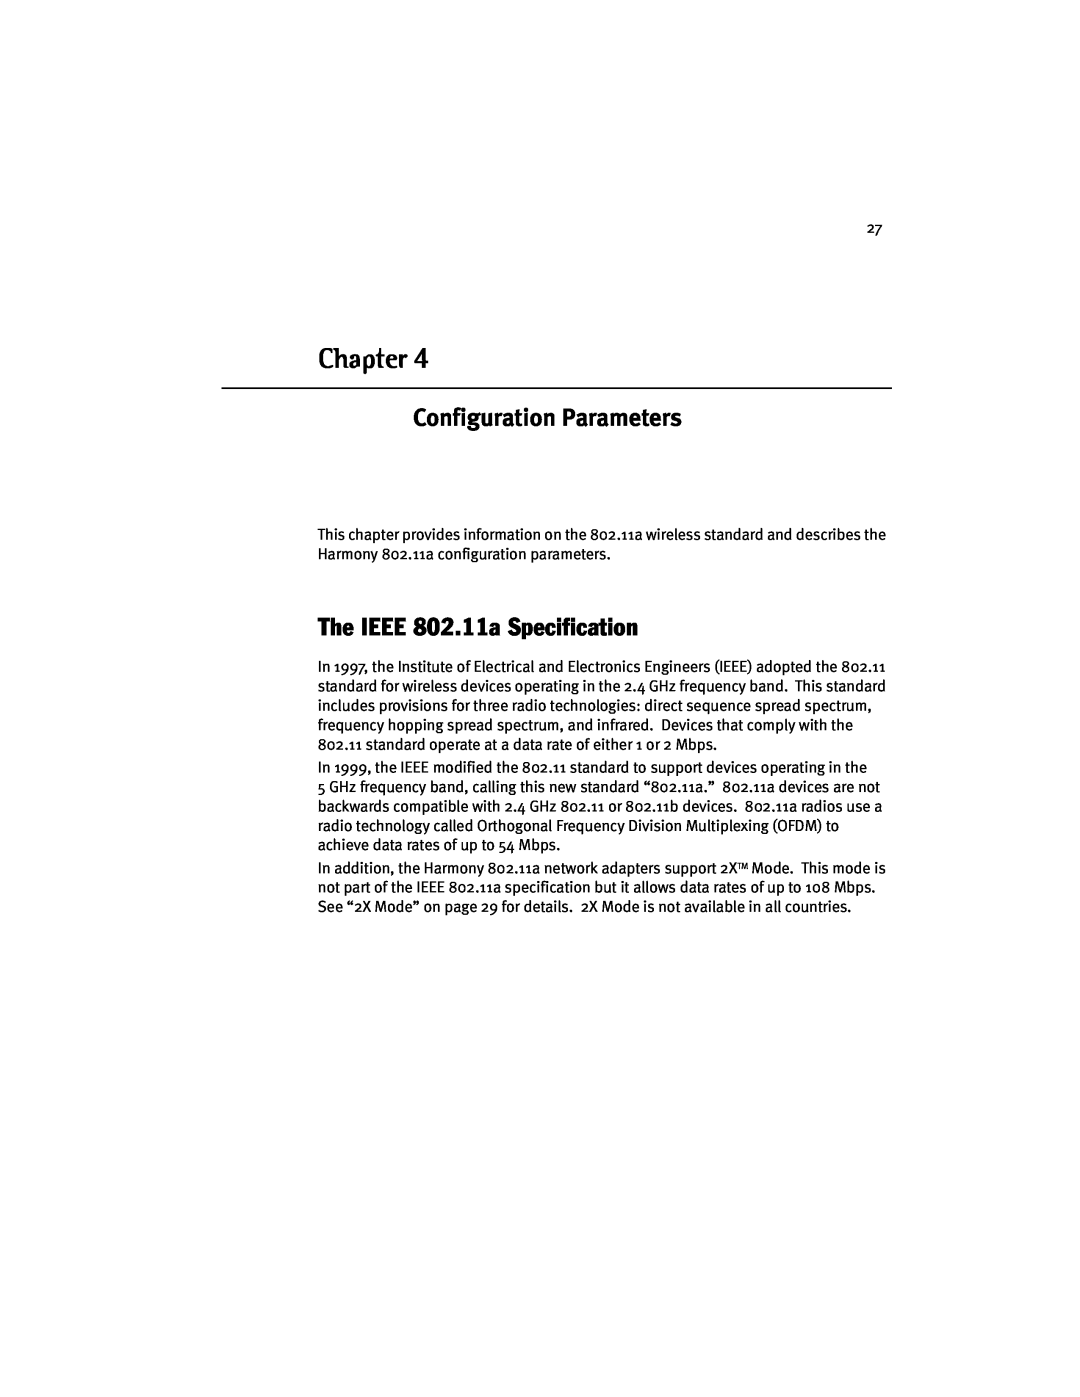 Harmony House manual Configuration Parameters, The IEEE 802.11a Specification, Chapter 